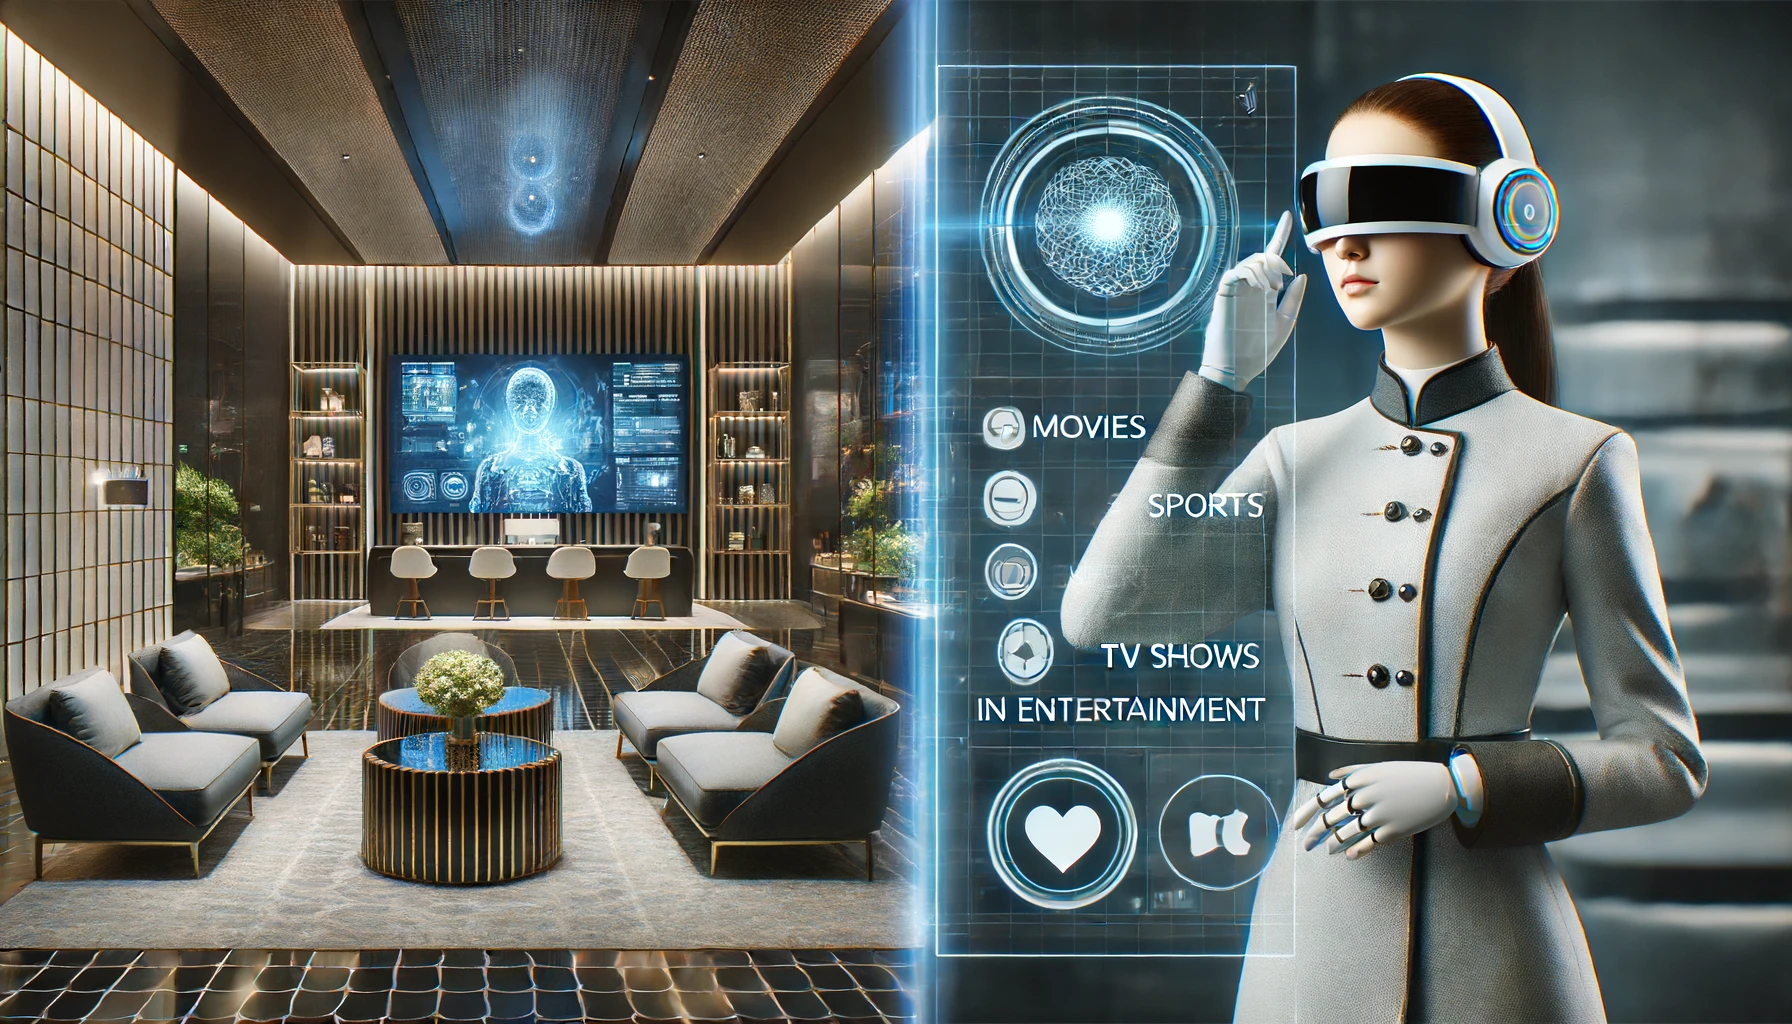 Split-screen image: Left side shows a futuristic hotel lobby with holographic displays. Right side features an AI concierge personalizing in-room entertainment for a guest.